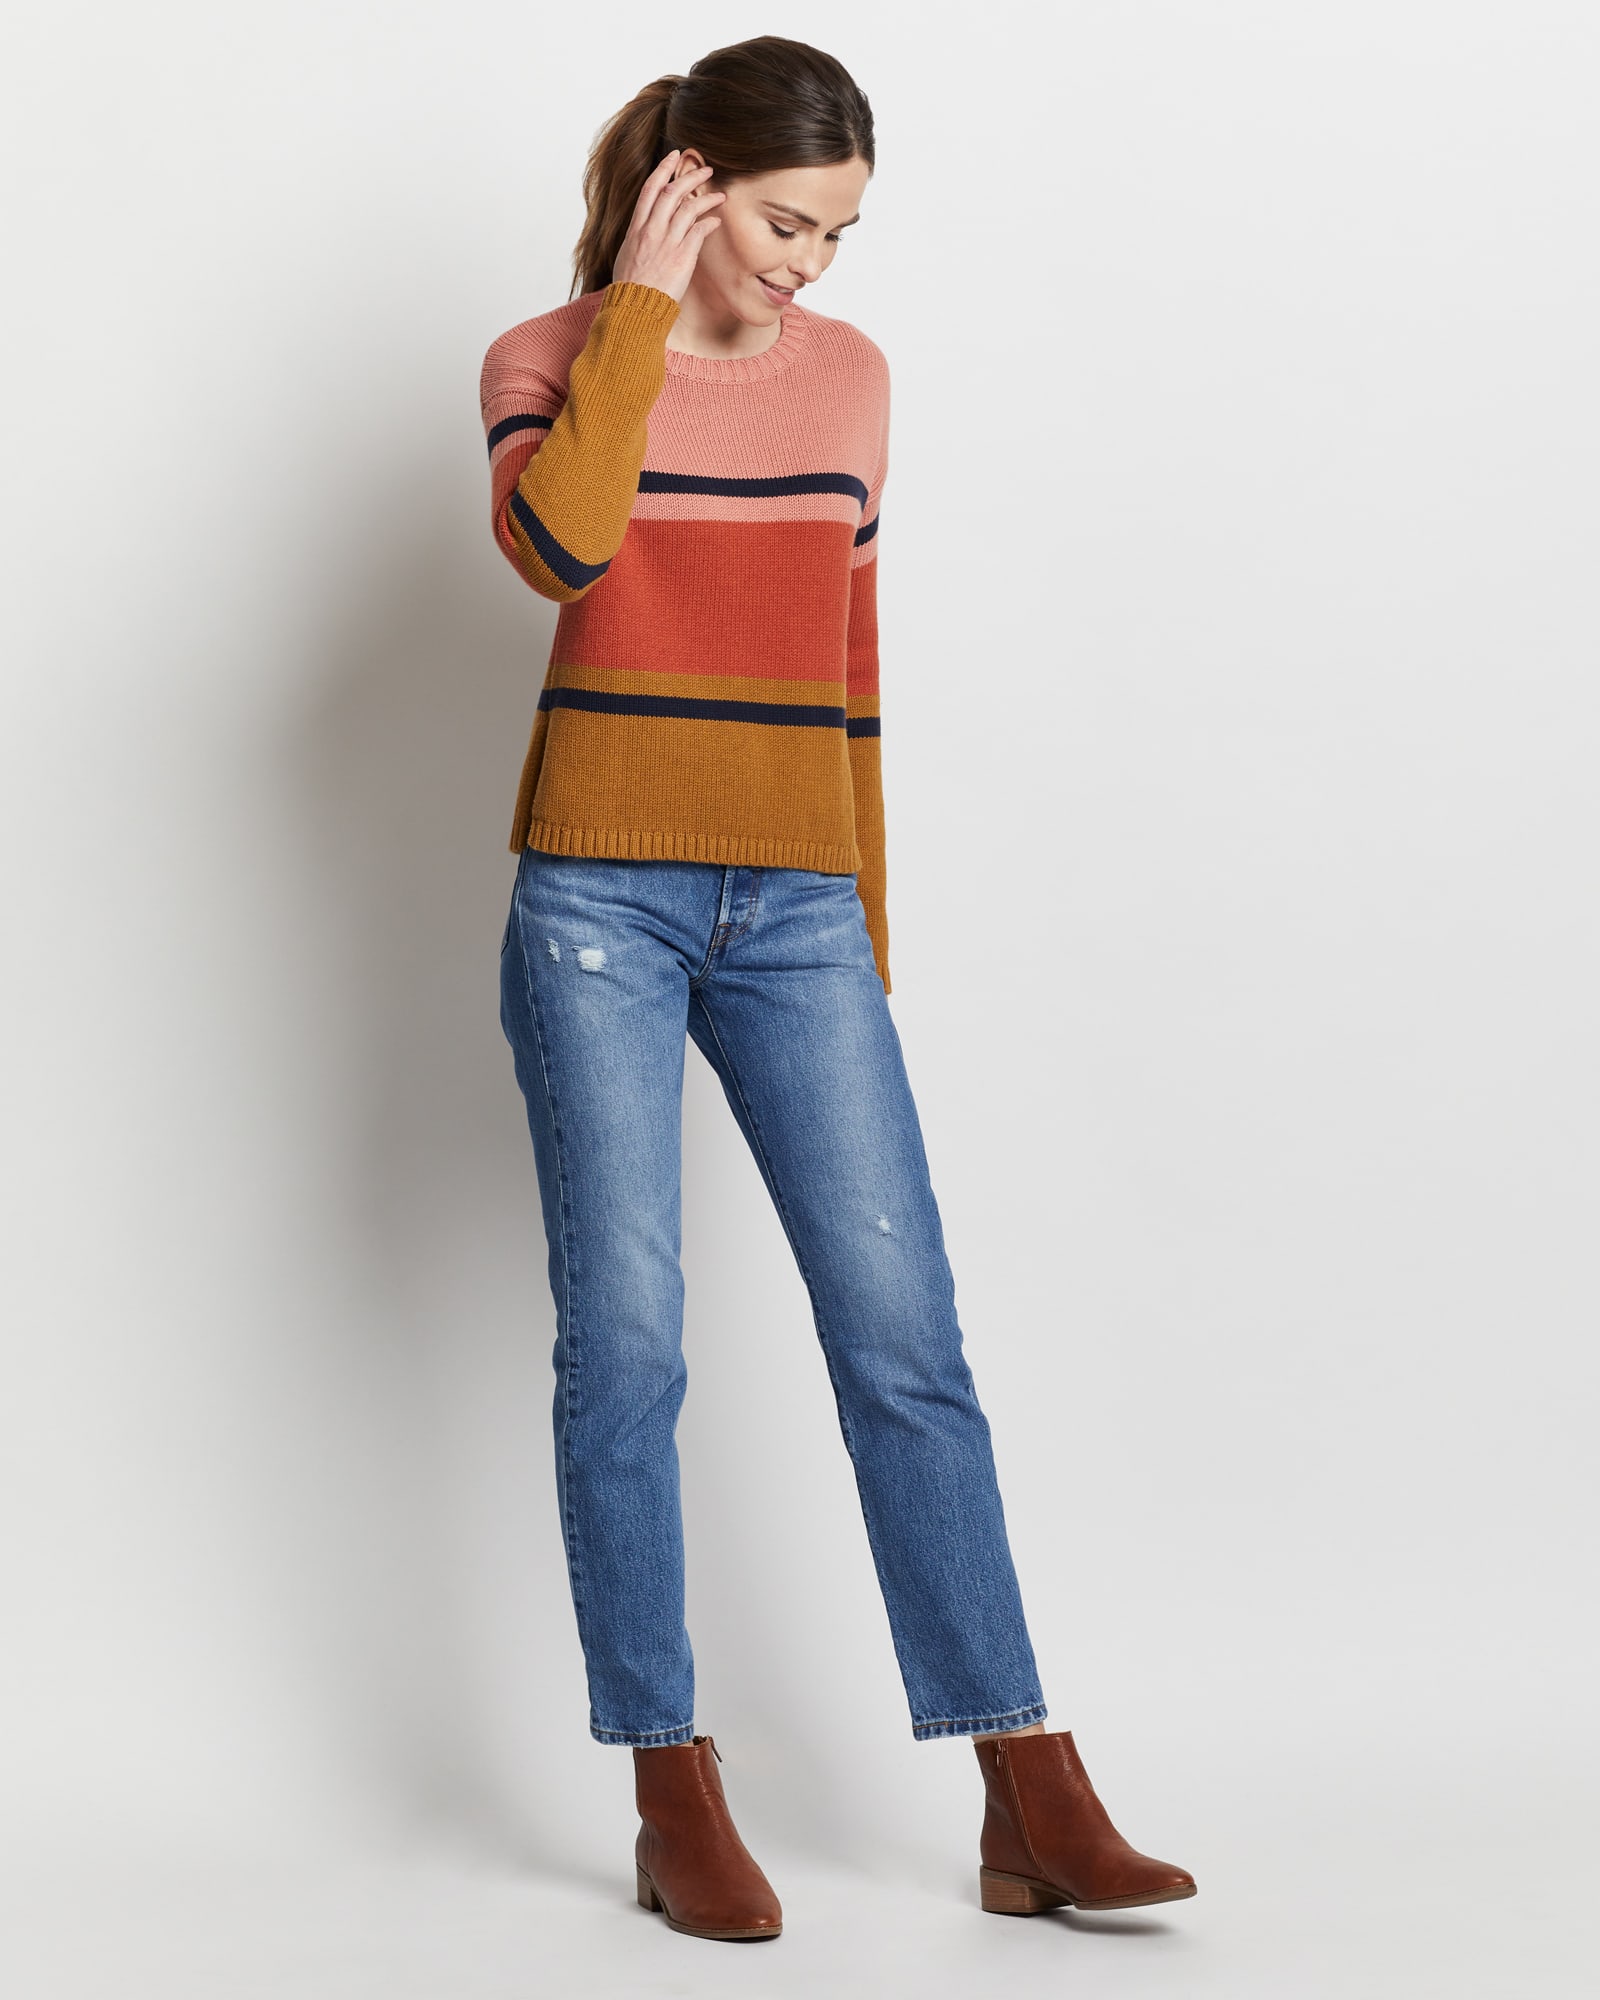 WOMEN'S RELAXED-FIT STRIPE PULLOVER